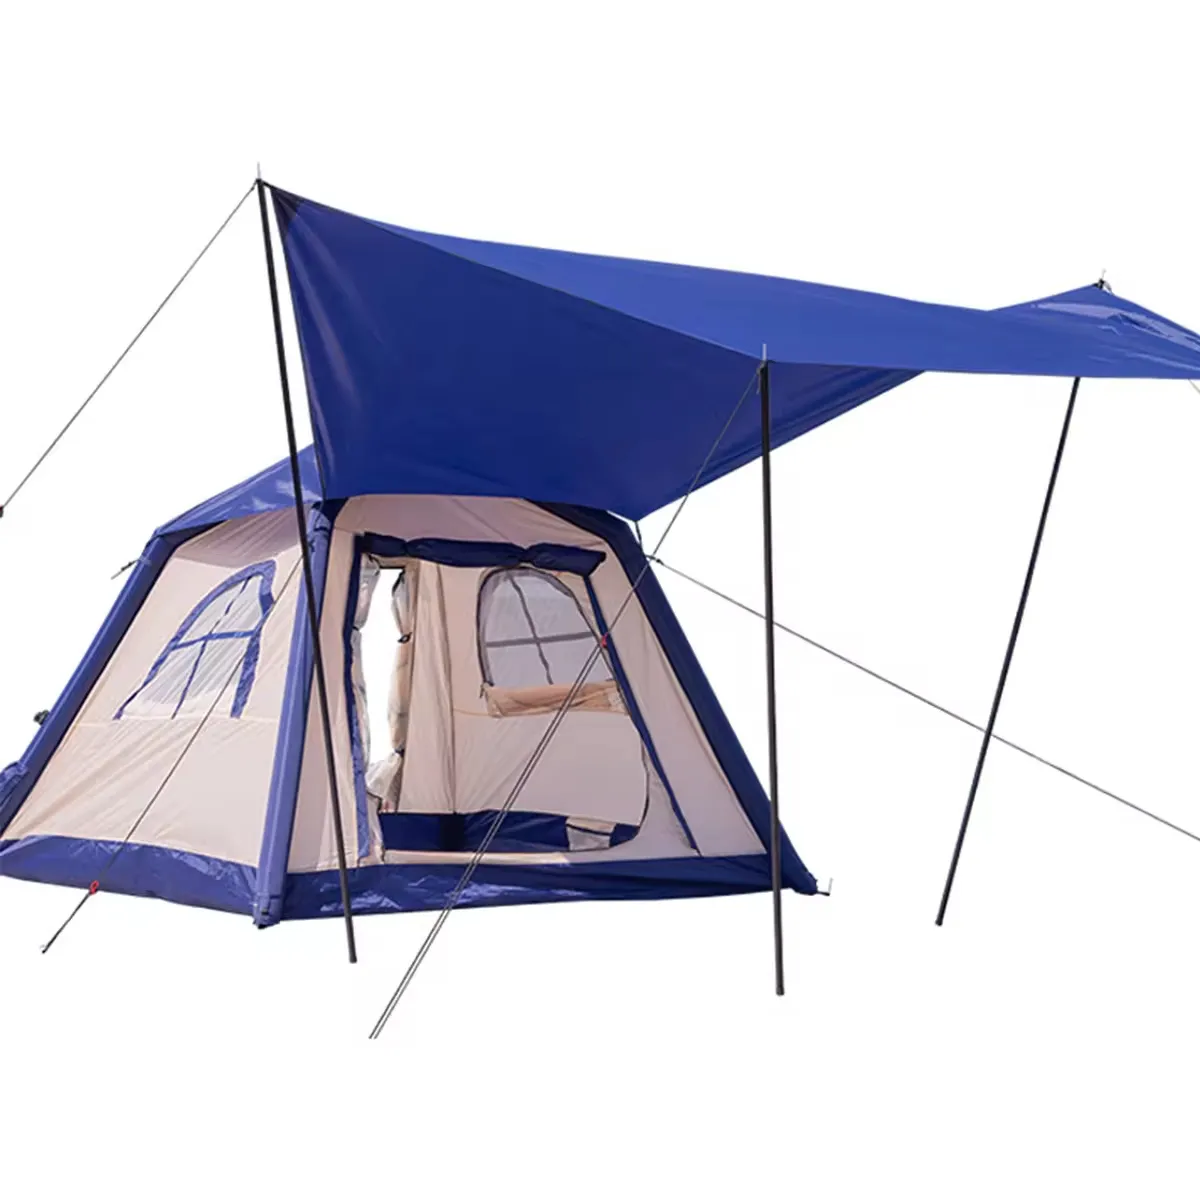 New Independent Air Column Beach Canopy Tent Trap 4 Person Tent Automatic Inflatable Camping Tent For Child Friend Play In Beach